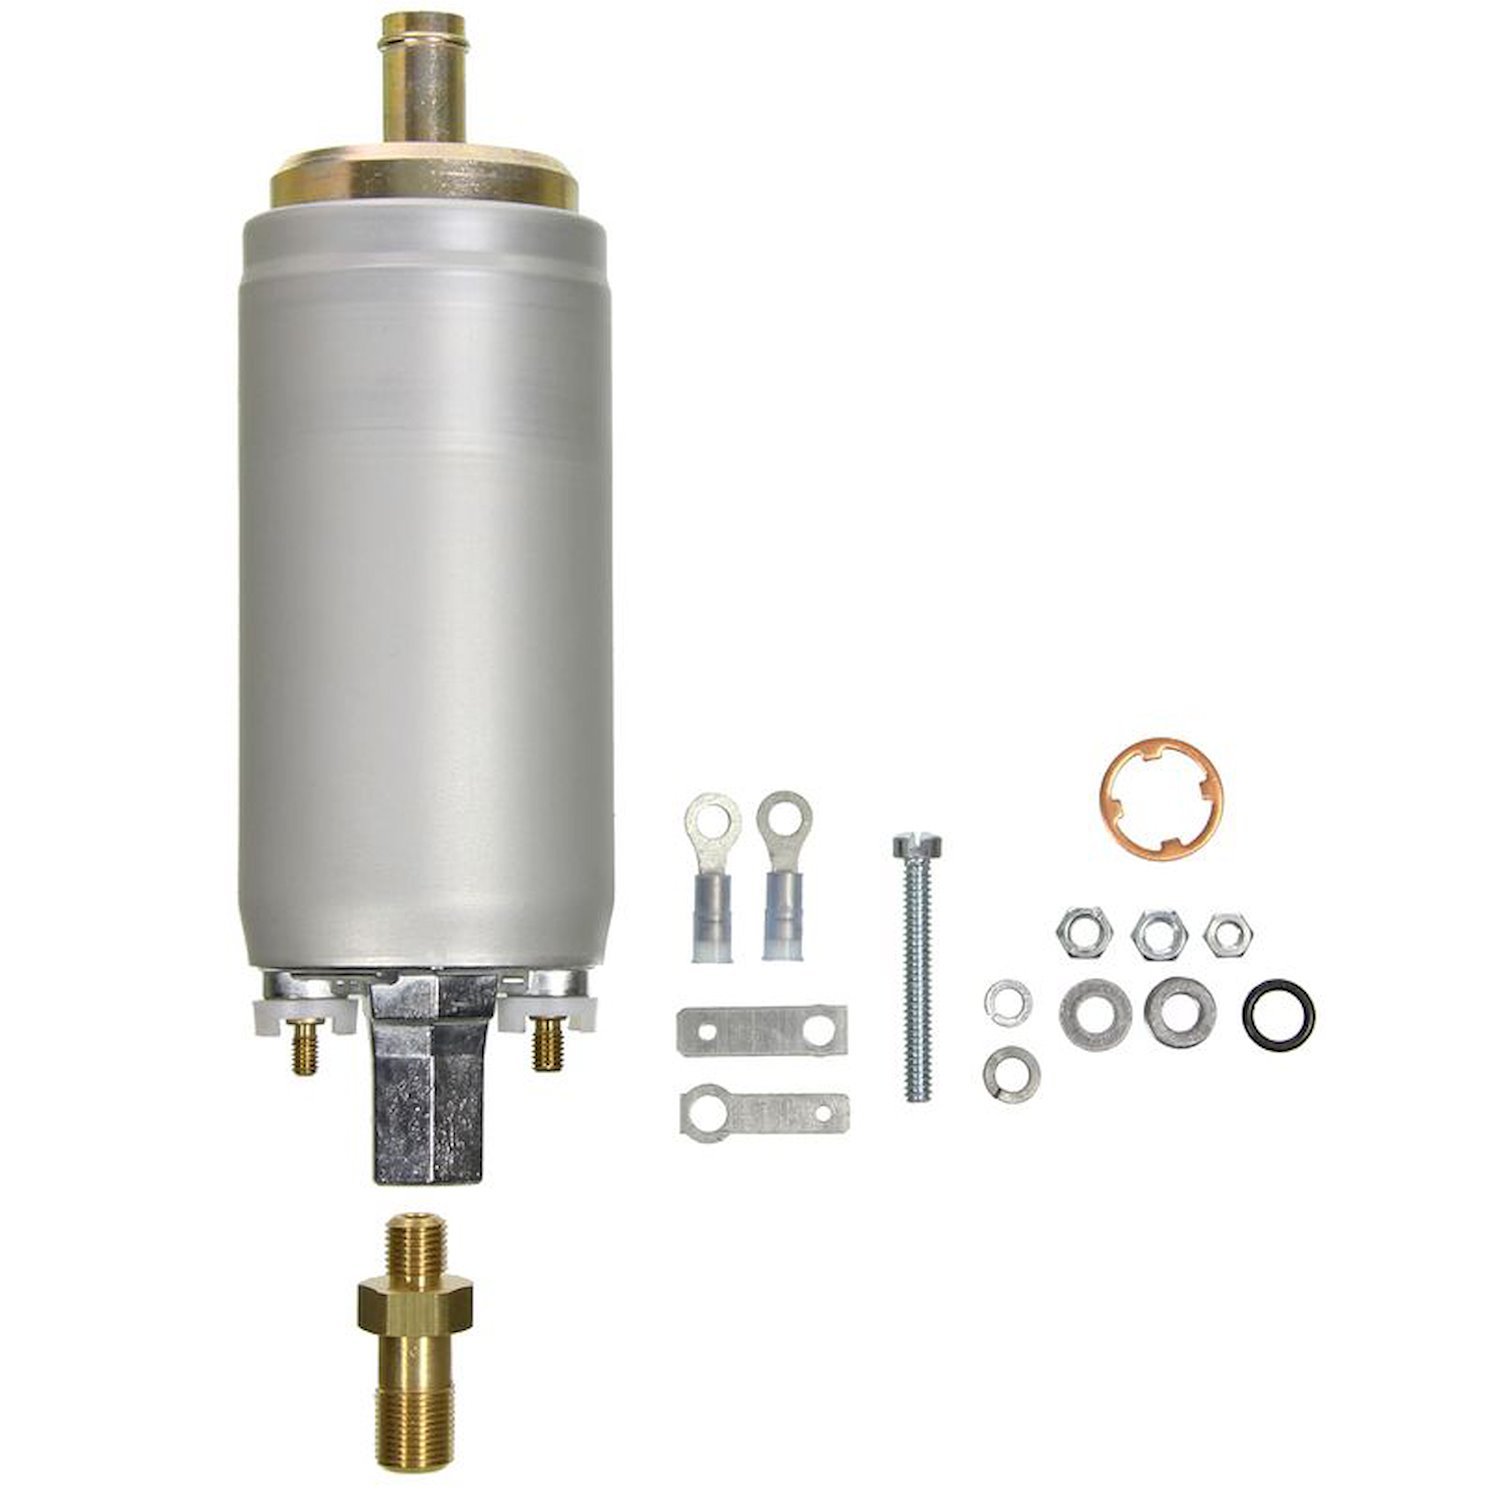 Replacement Electric In Line Fuel Pump for Multiple Makes